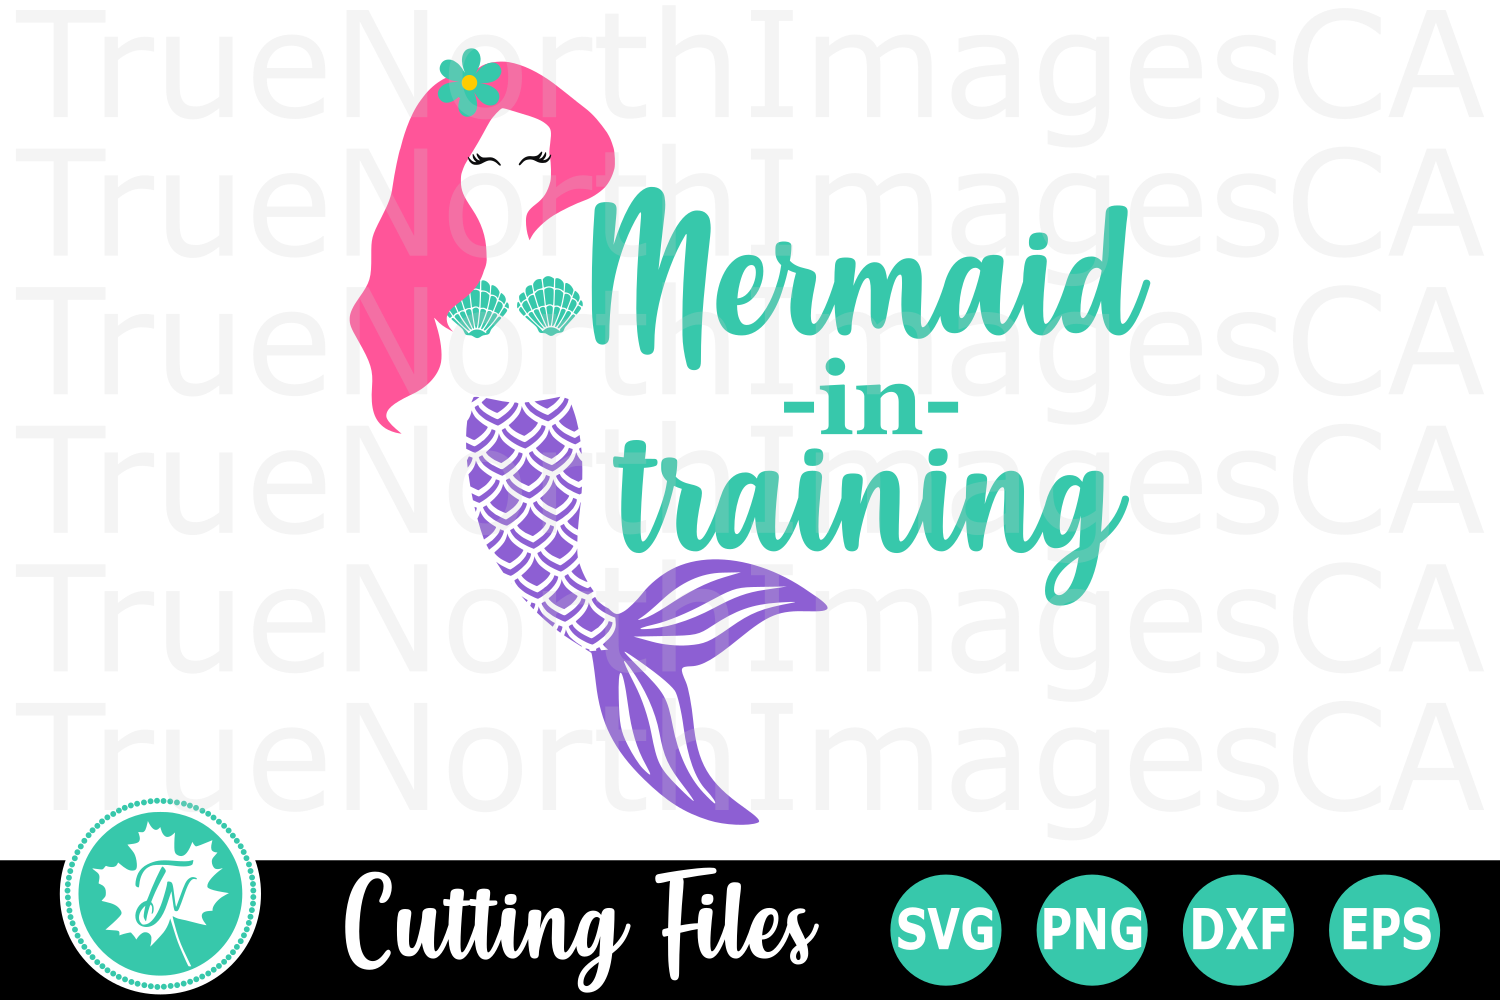 Download Mermaid in Training - A Summer SVG Cut File